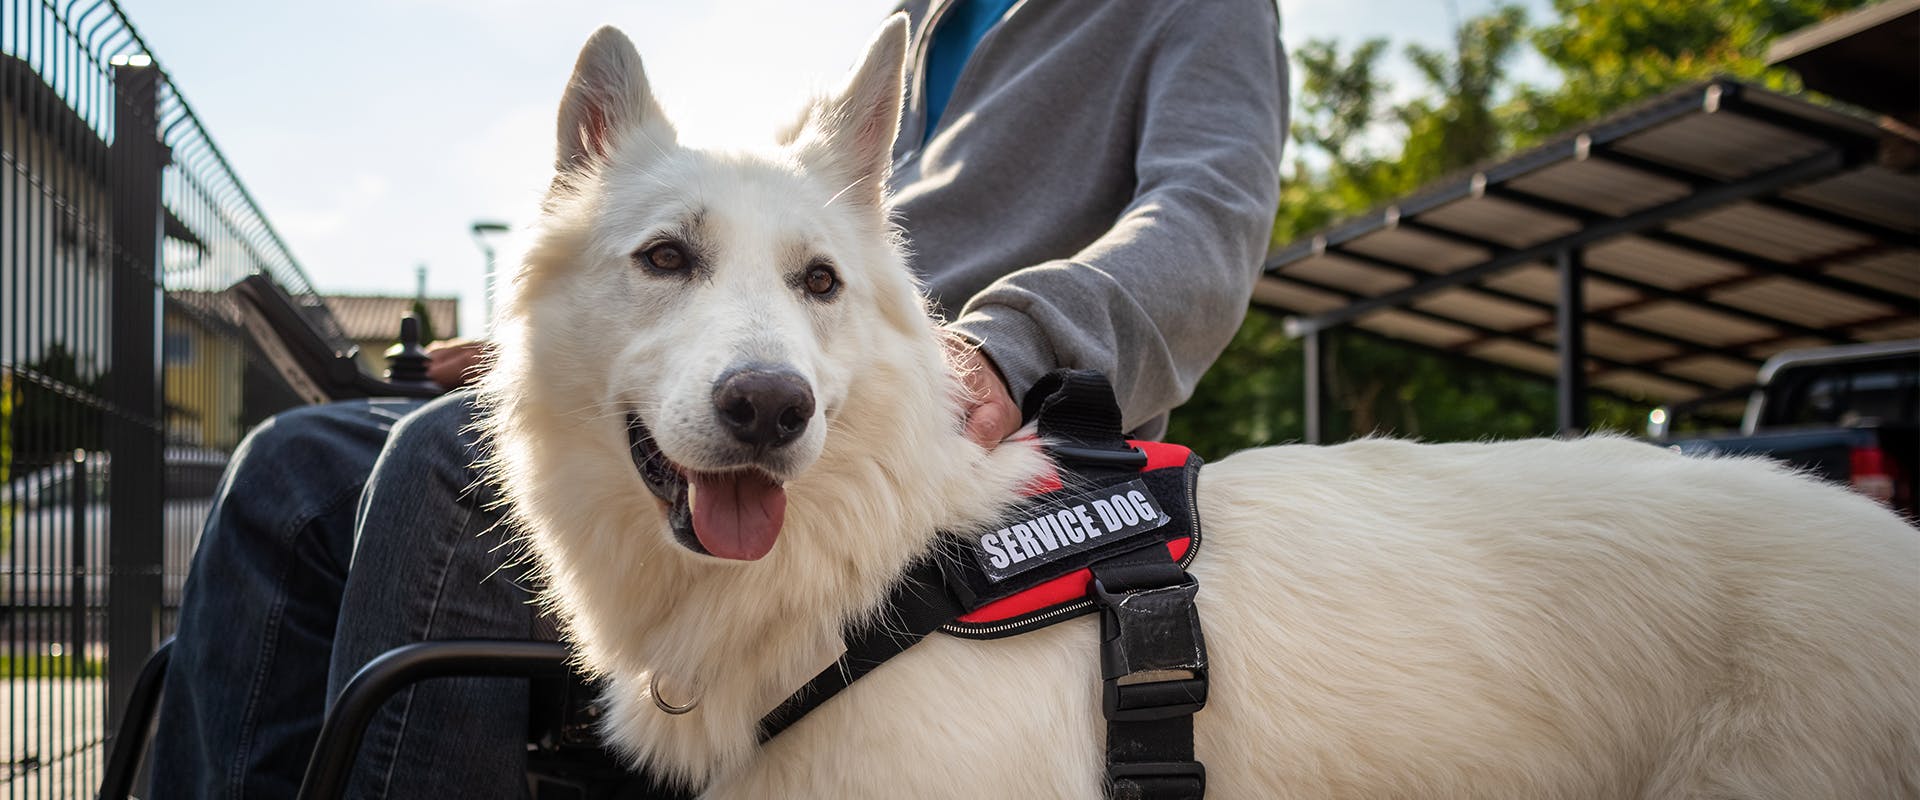 A fluffy white service dog standing next to a person in a wheelchair